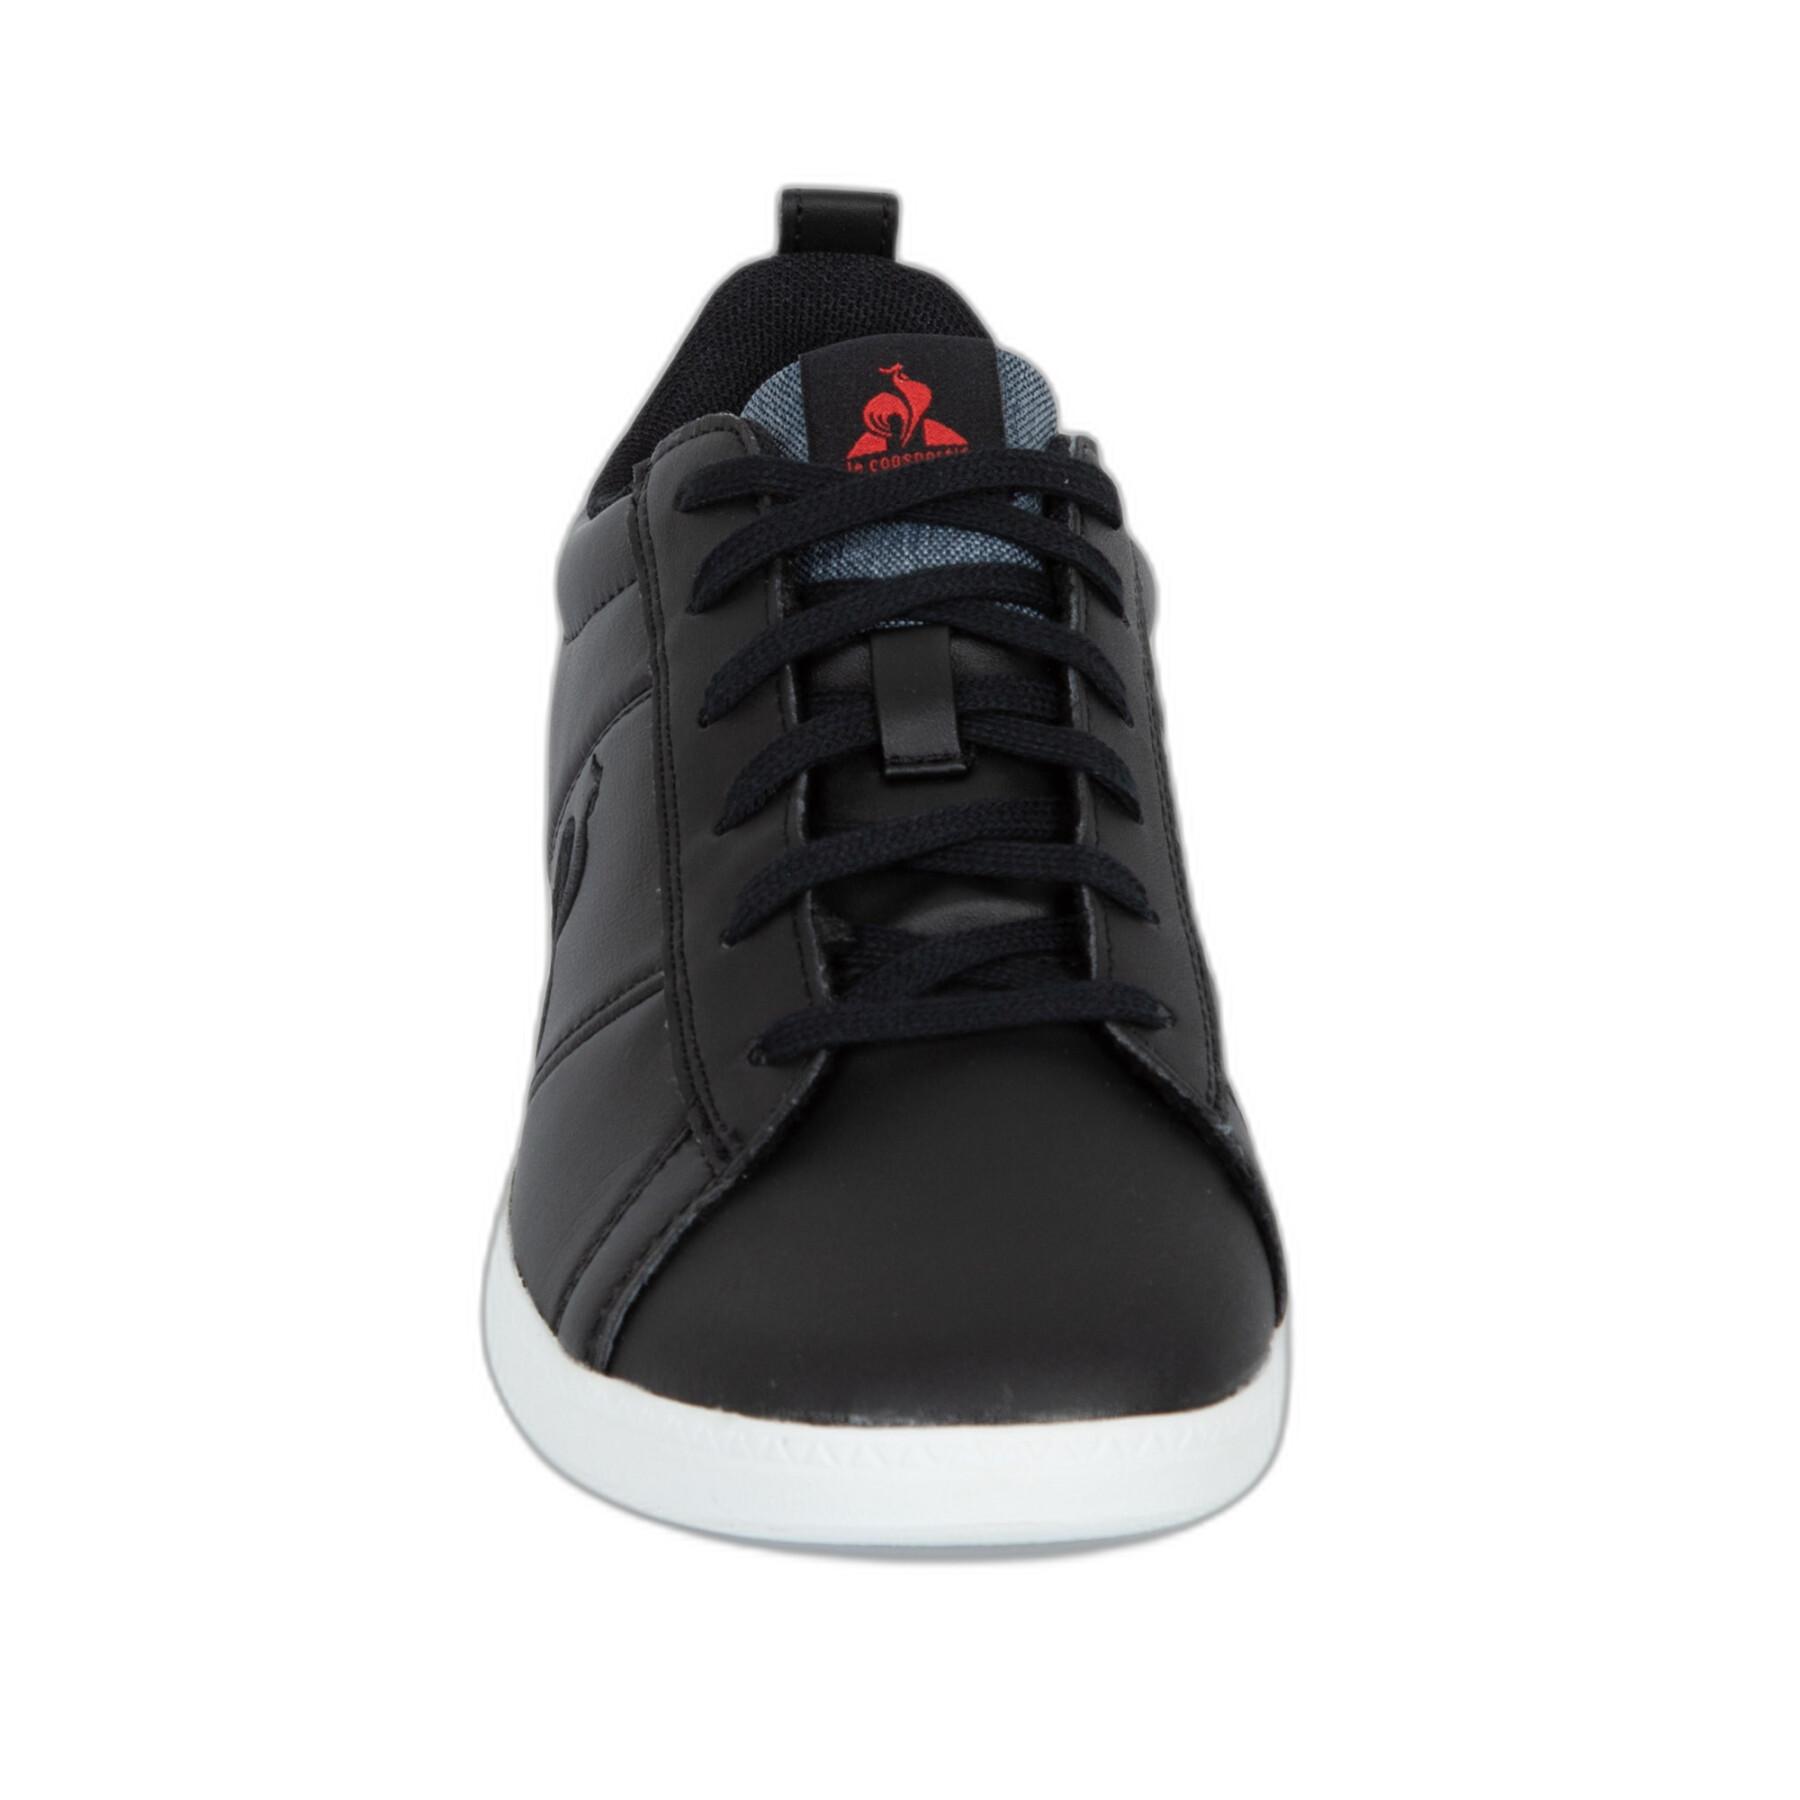 Kindertrainers Le Coq Sportif Courtclassic Gs Workwear